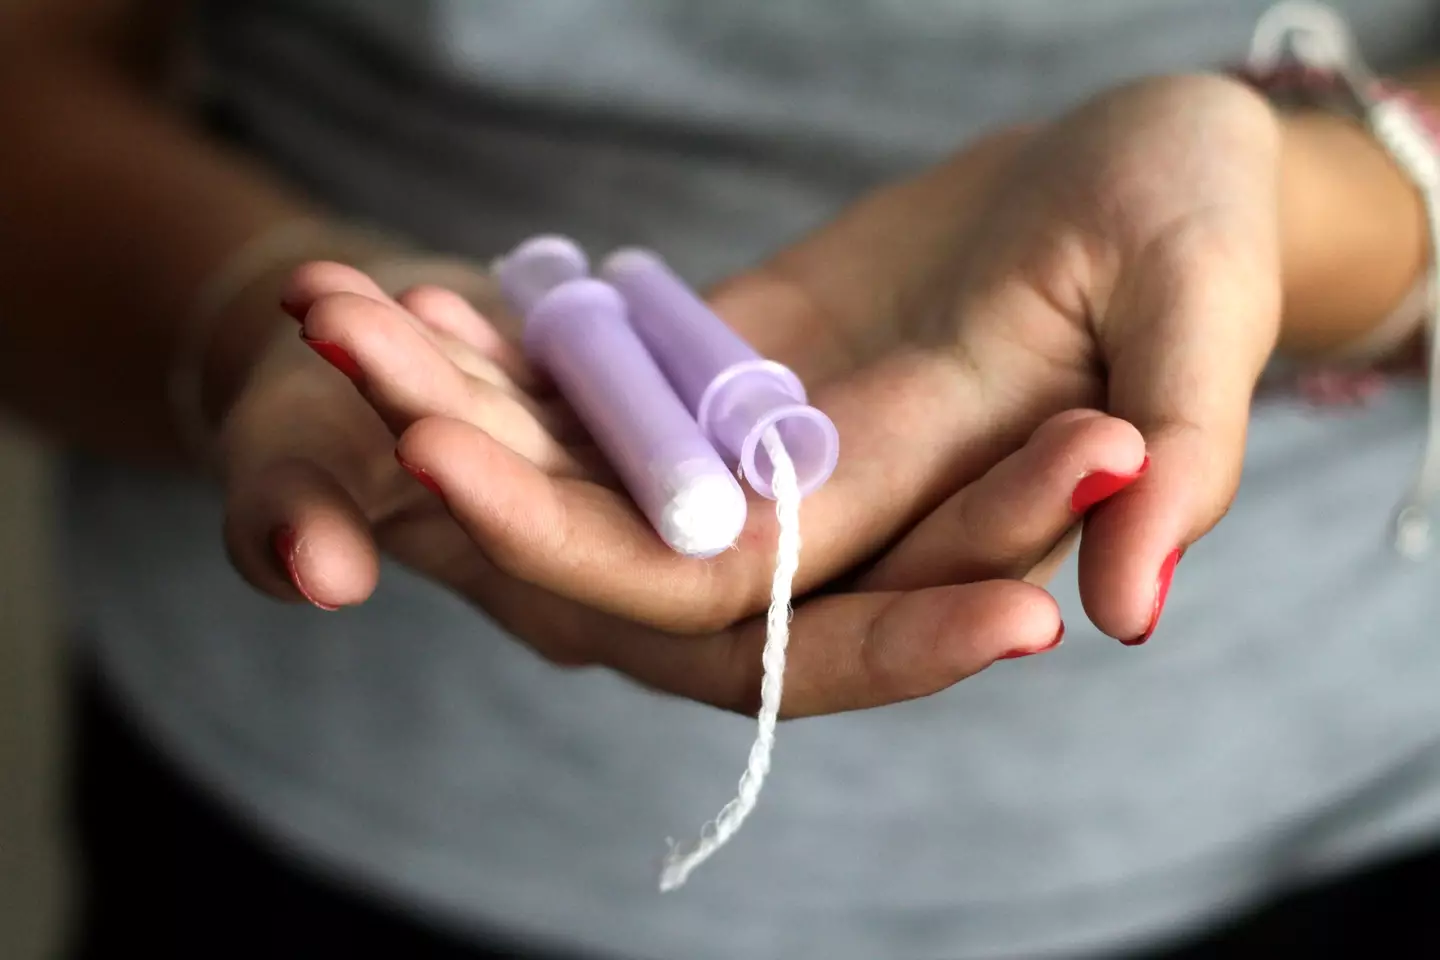 One woman accidentally left her tampon inside for two entire years. (Isabel Pavia / Getty Images)